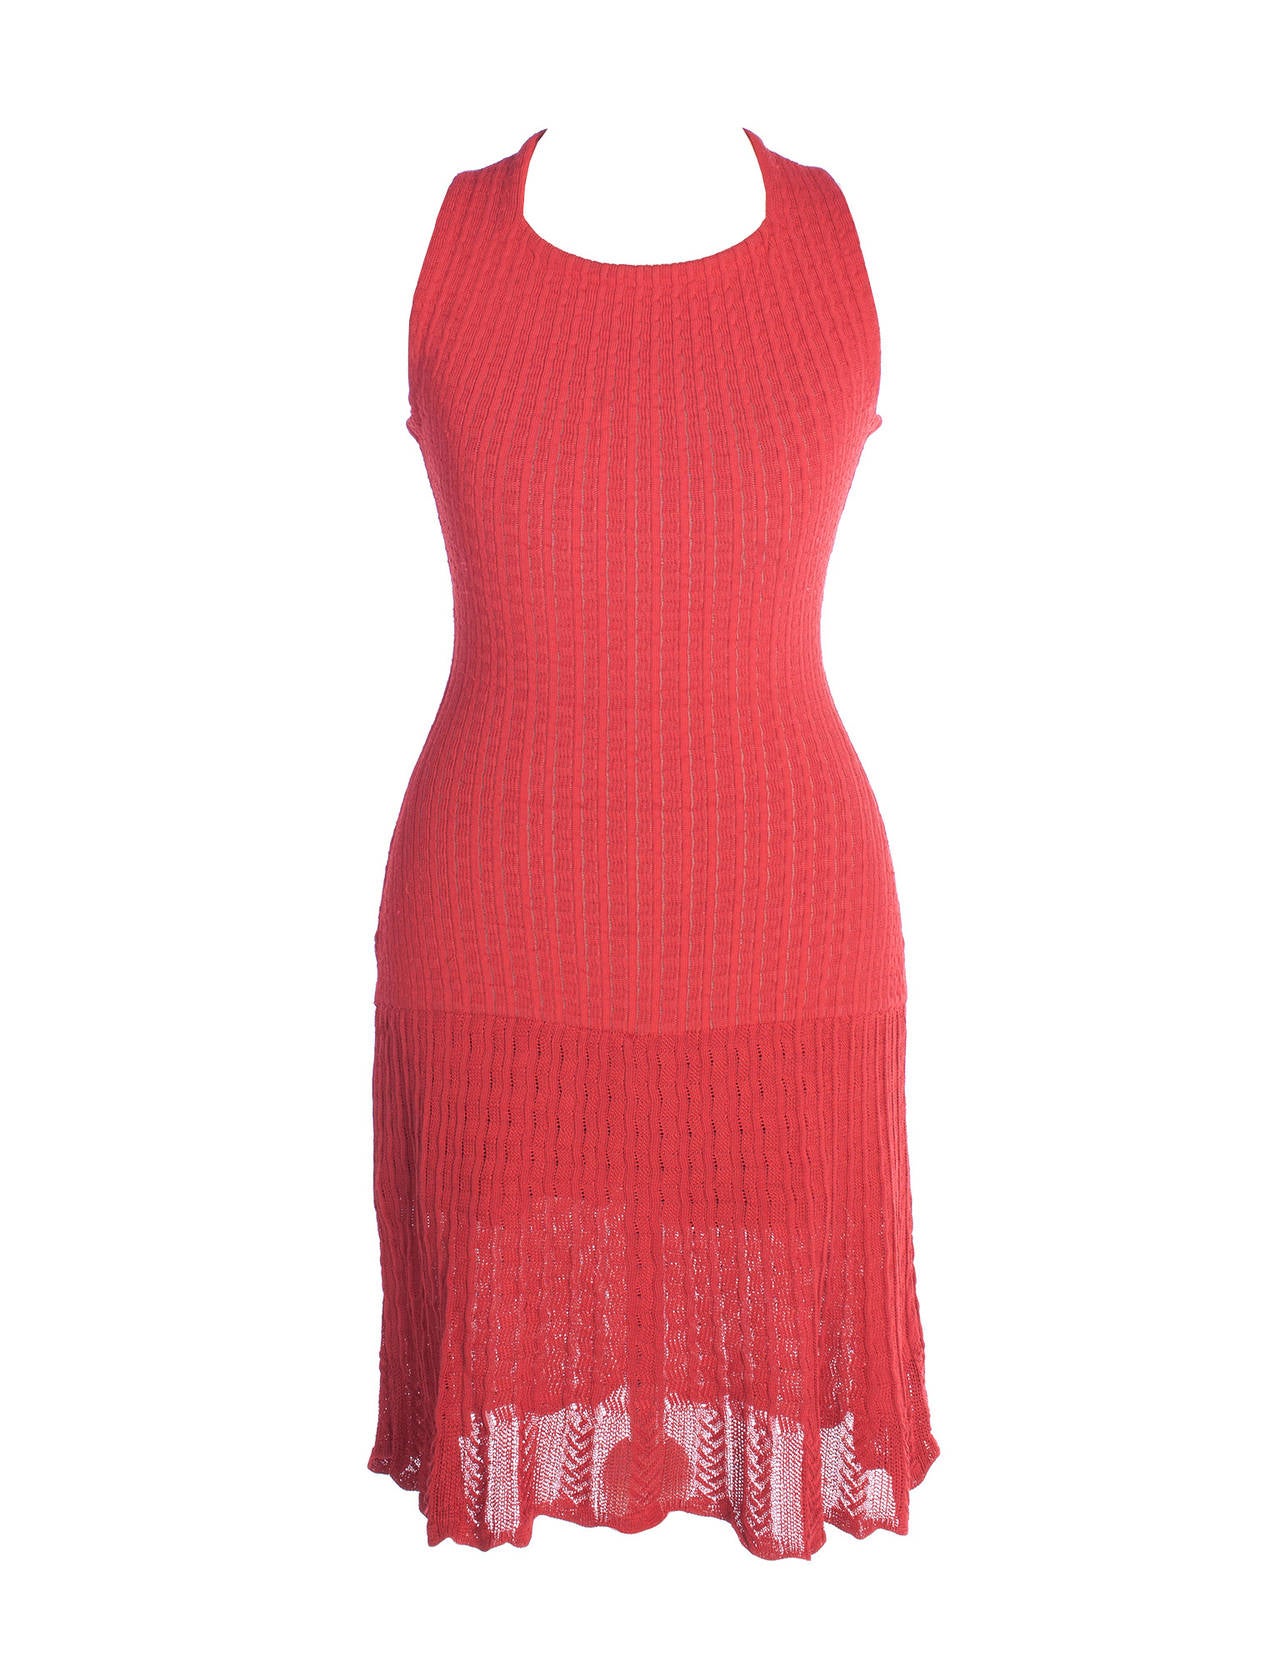 Azzedine Alaia knitted dress in salmon color. Dress has iconic pointelle knitted design, tank style with hidden back zipper, body suit underwear with 2 snaps, flounce skirt in a lighter pointelle. body con micro mini style. Super sexy piece from the